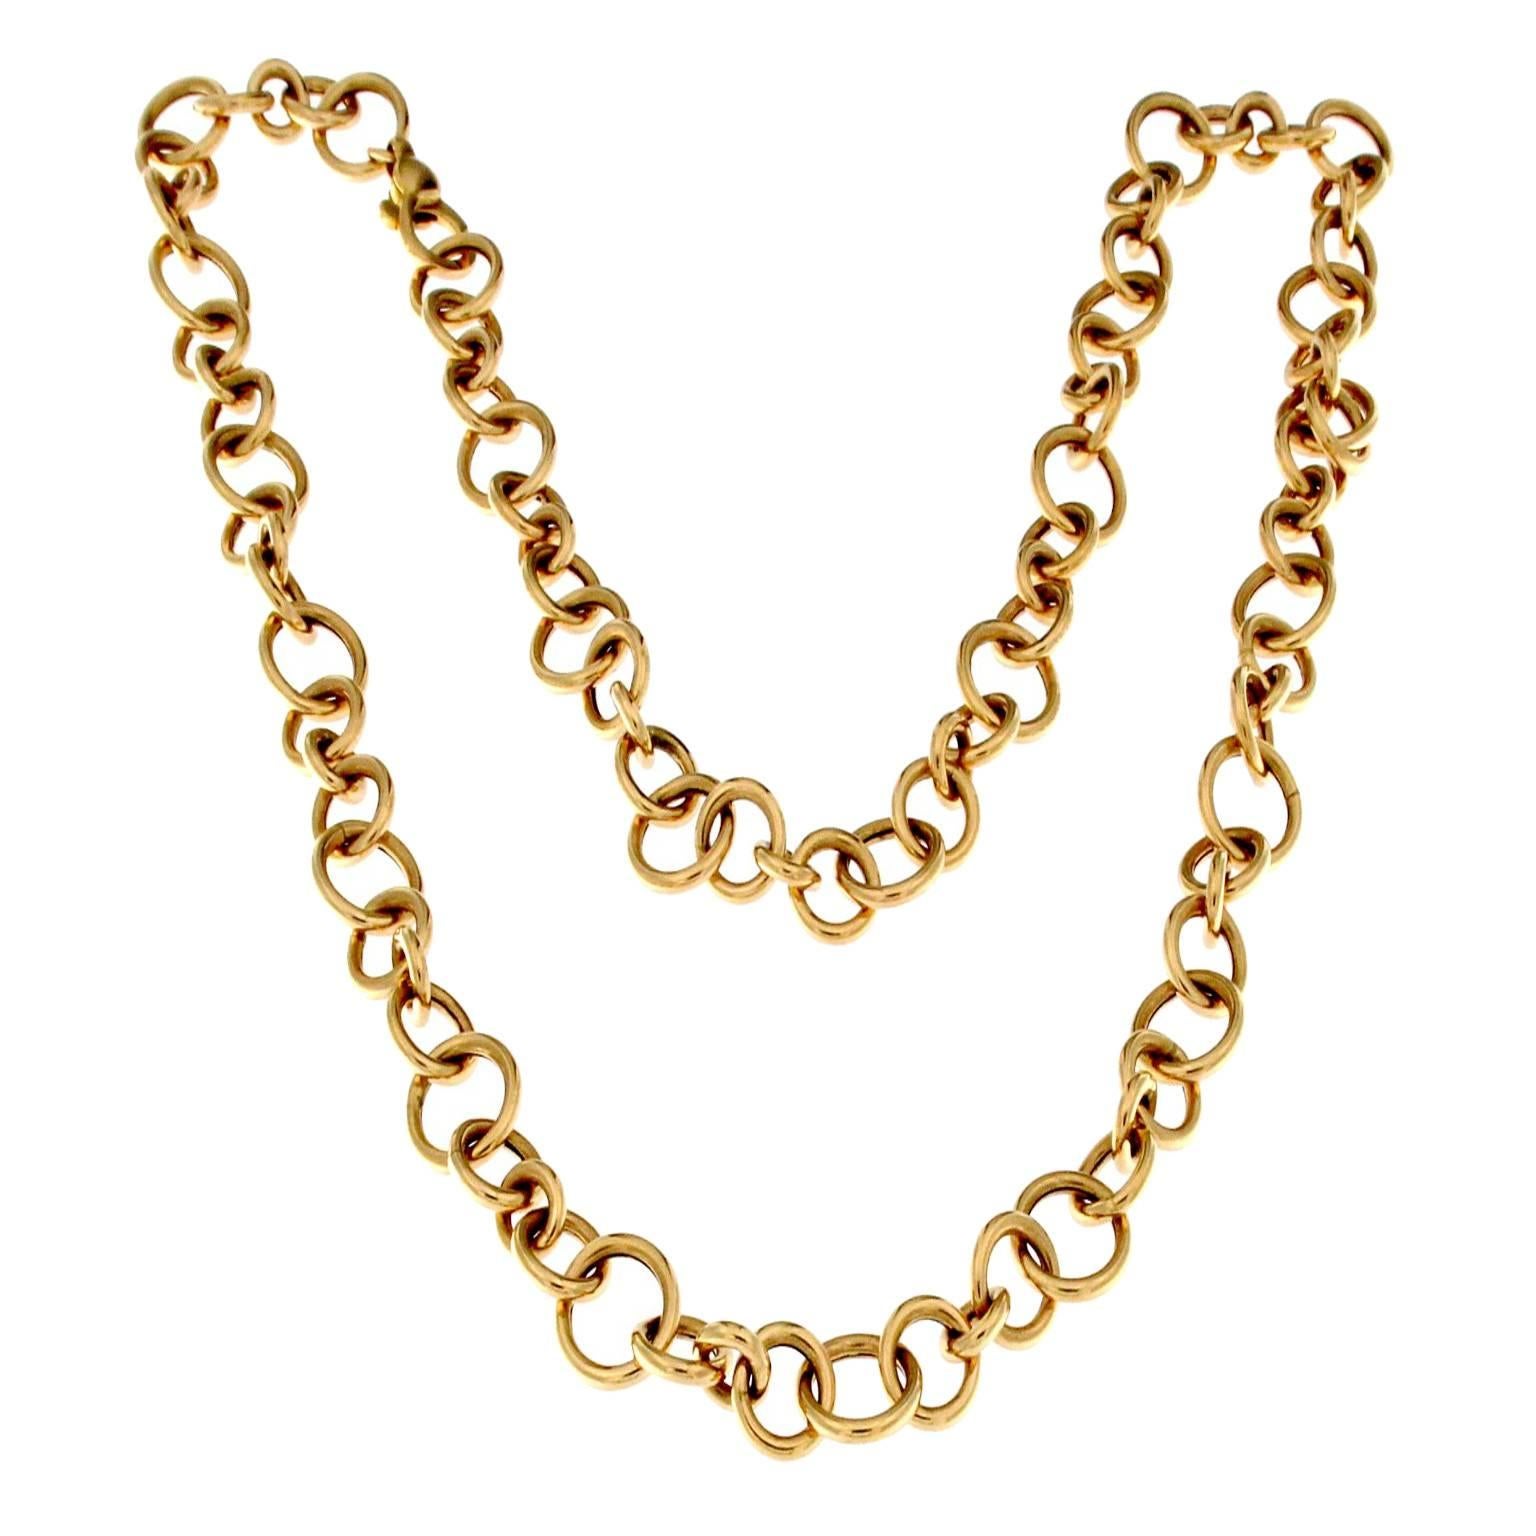 This pink gold headband necklace has an extraordinary dynamism thanks to the scaling of the various circles that attribute a rhythm of unique shapes.
Suitable for all occasions can certainly be used also to attack different pendants.
The total